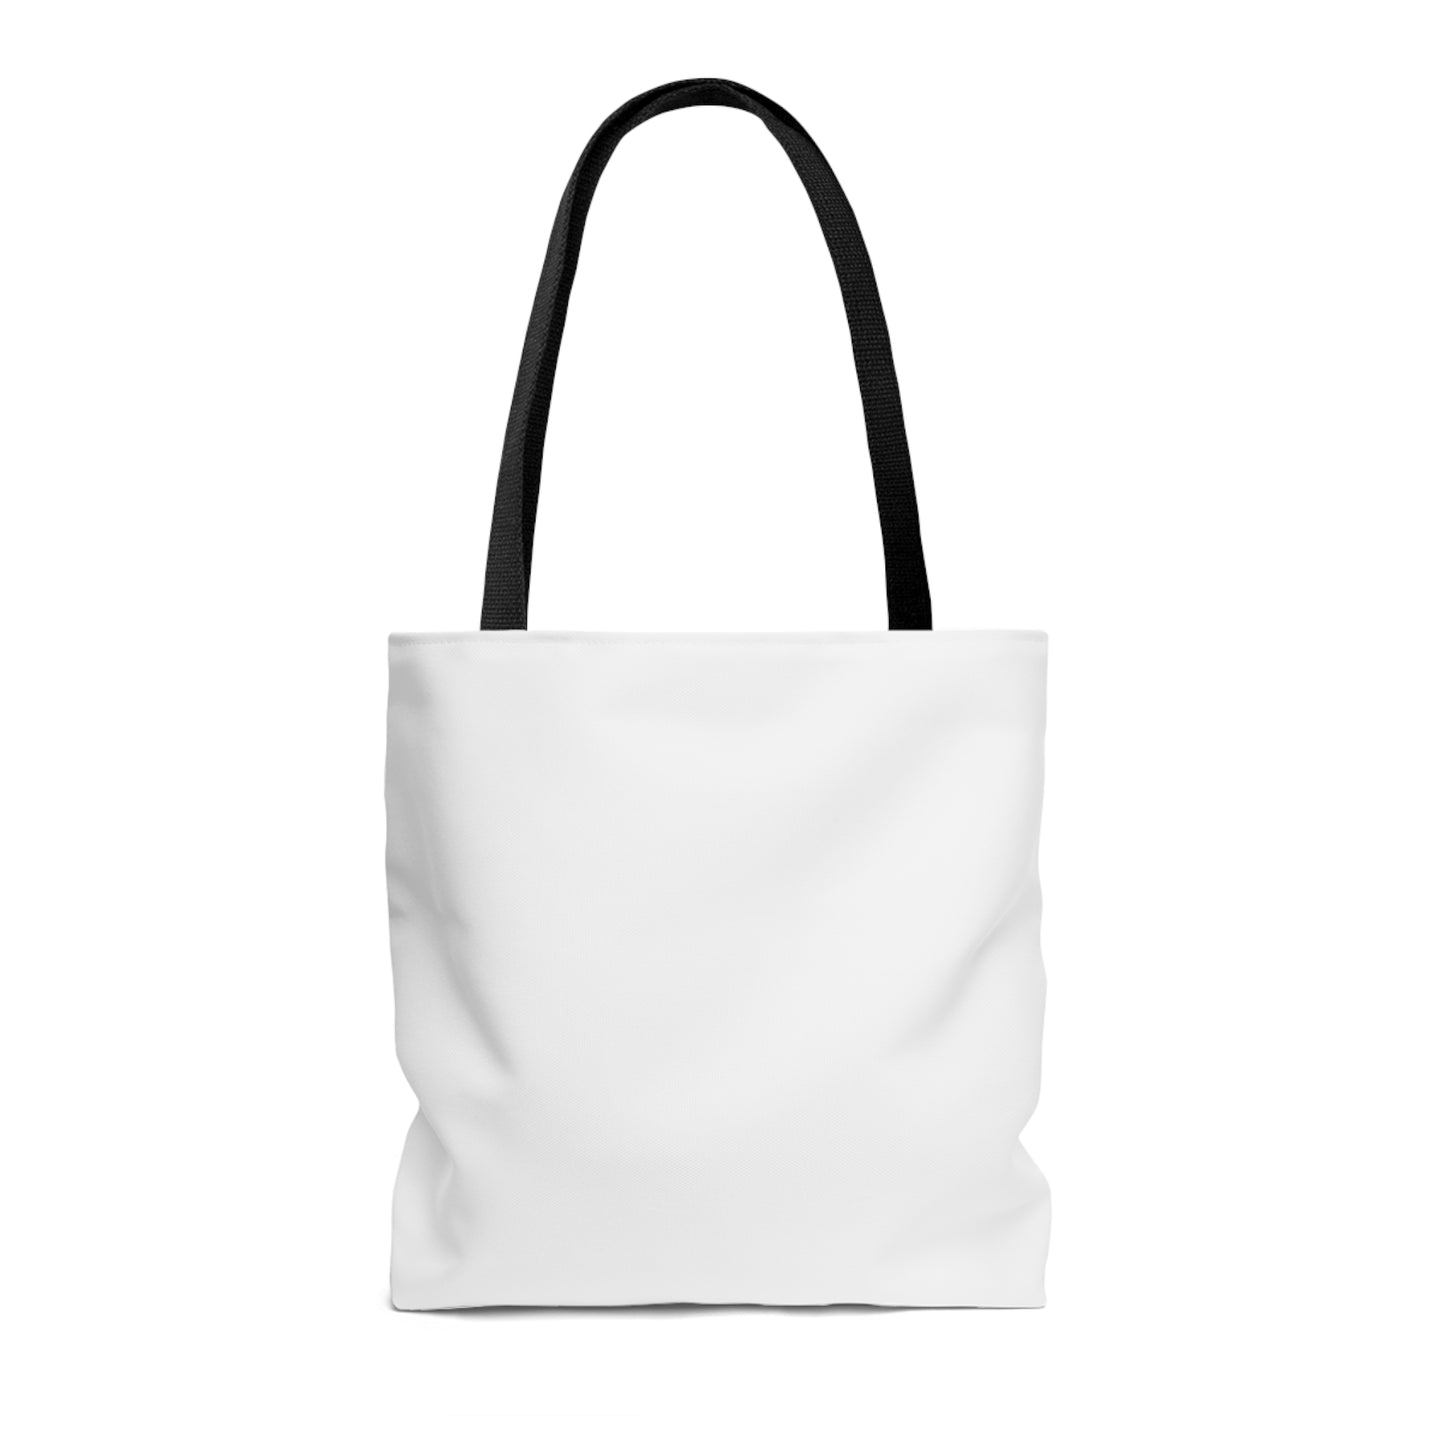 Christ Is The Way, The Truth, & The Light Of My LIfe Tote Bag